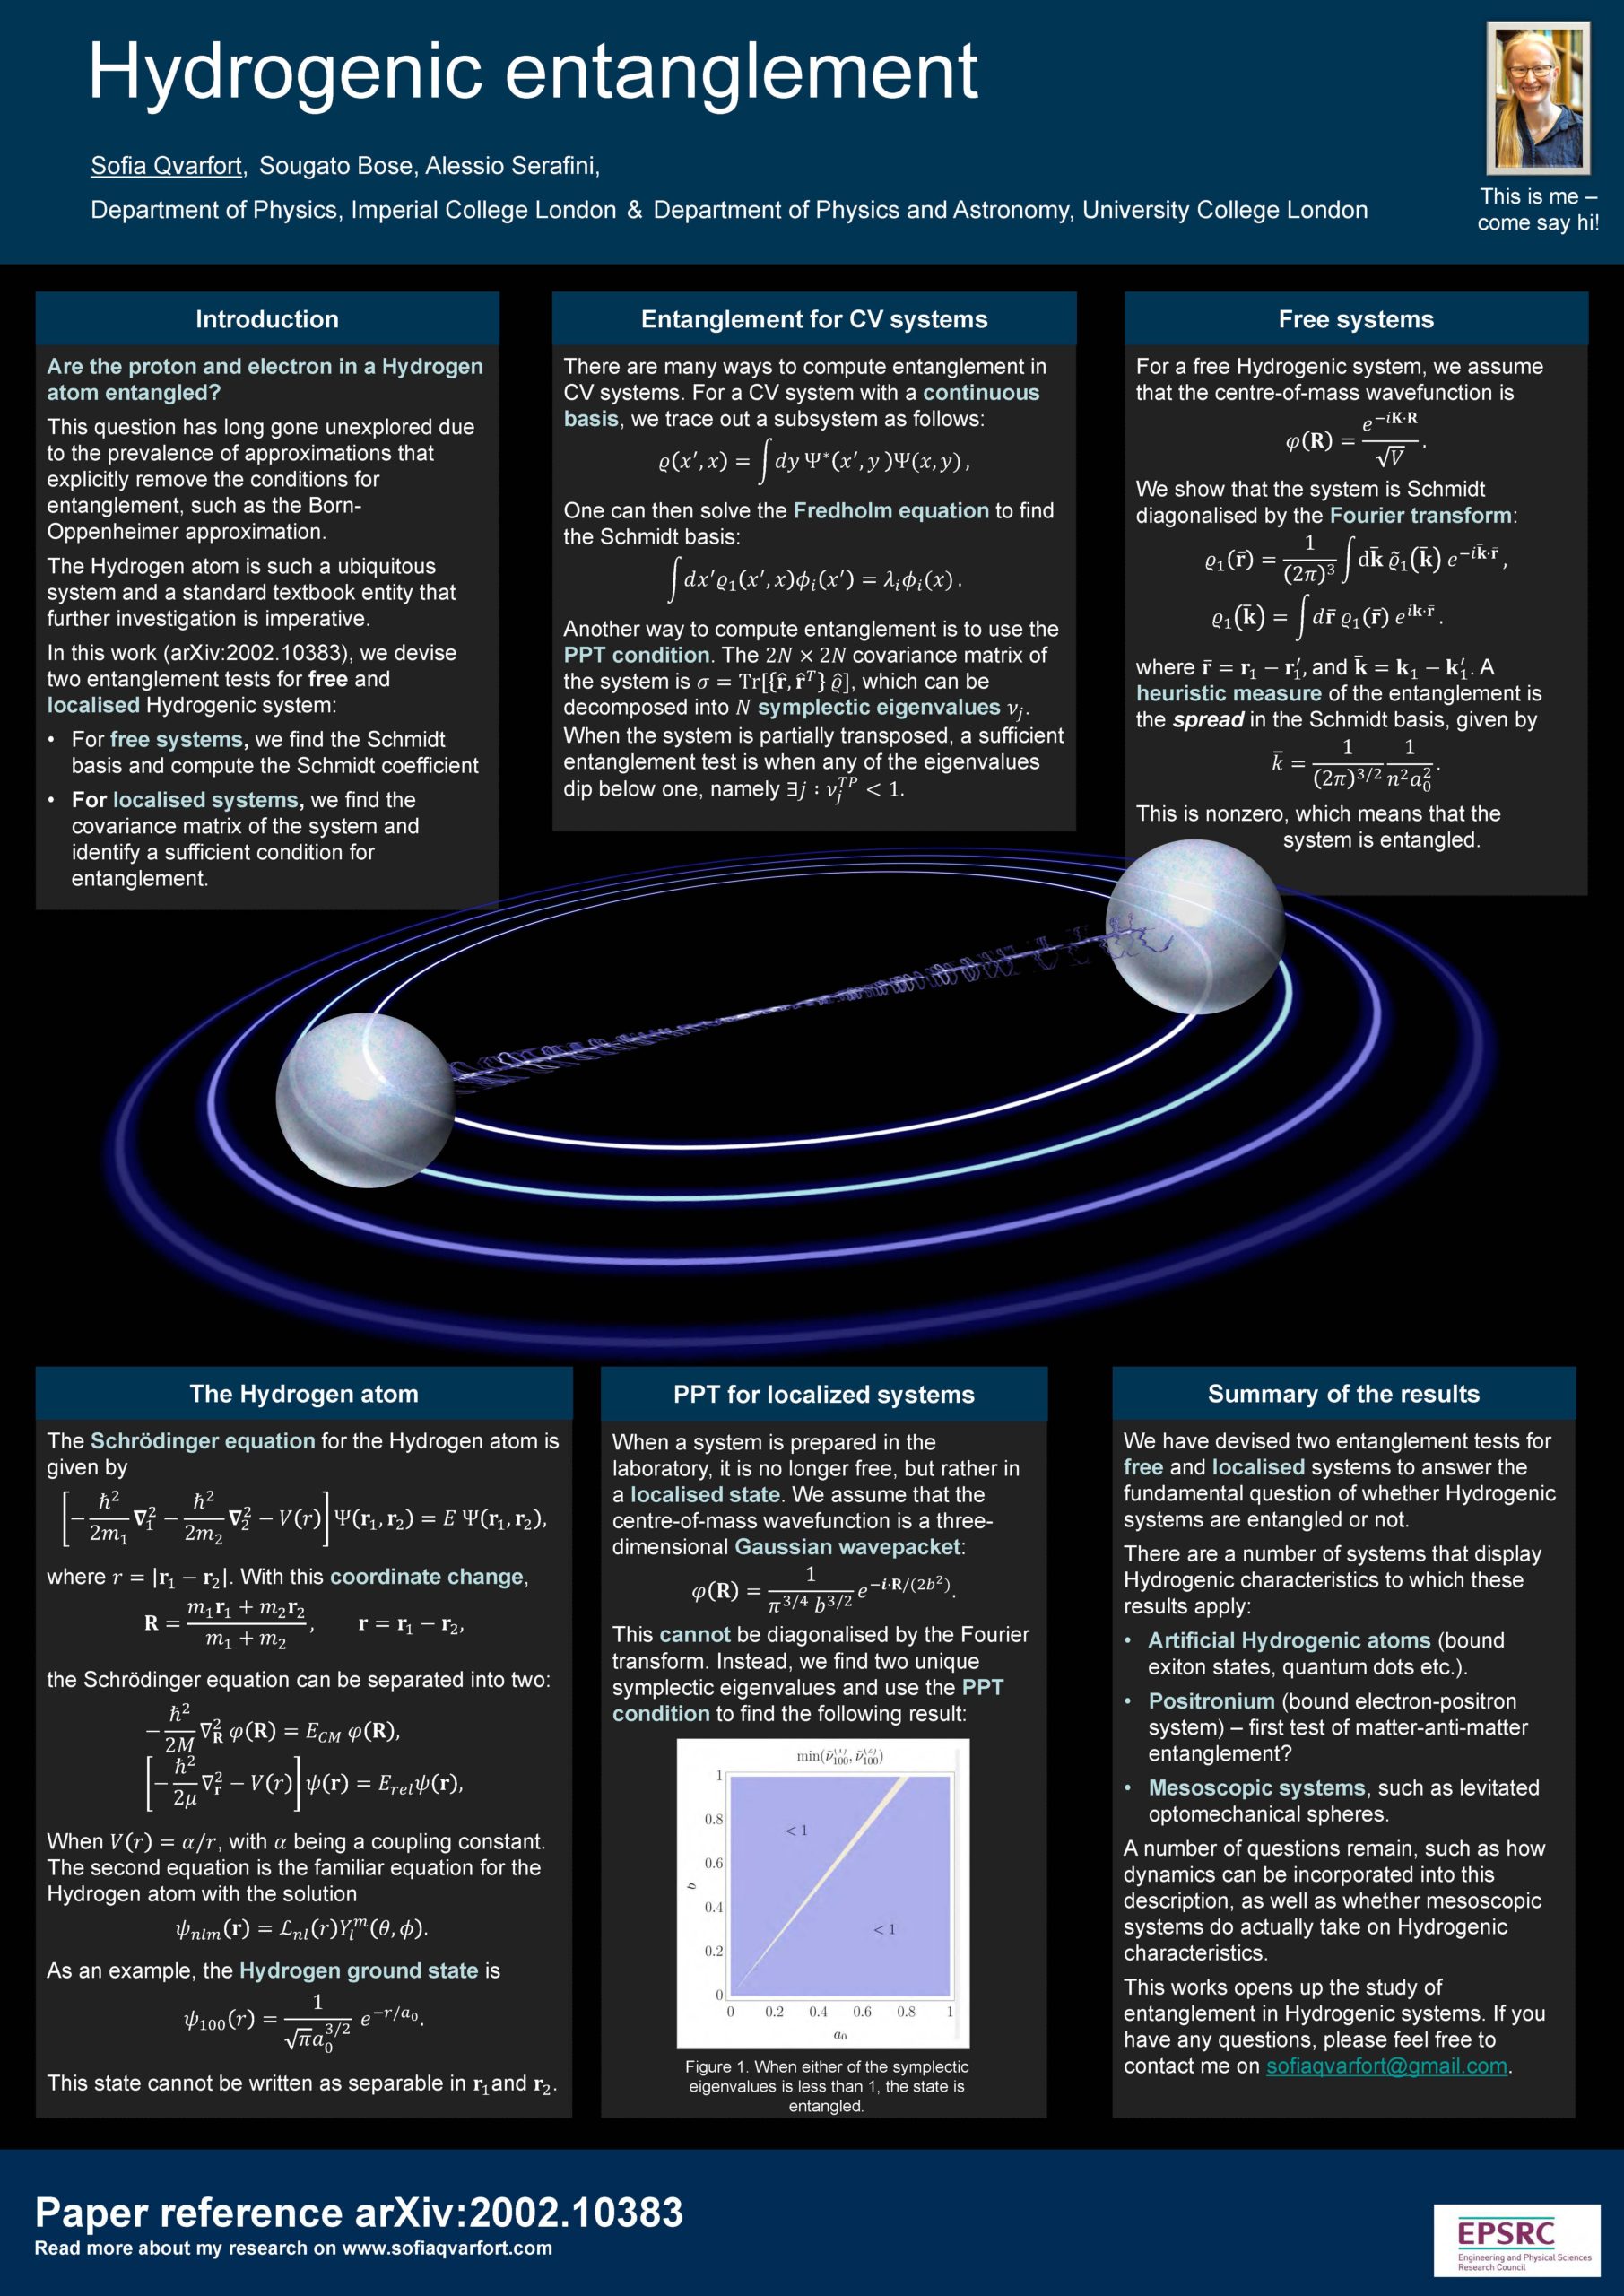 A poster entitled "Hydrogenic entanglement"